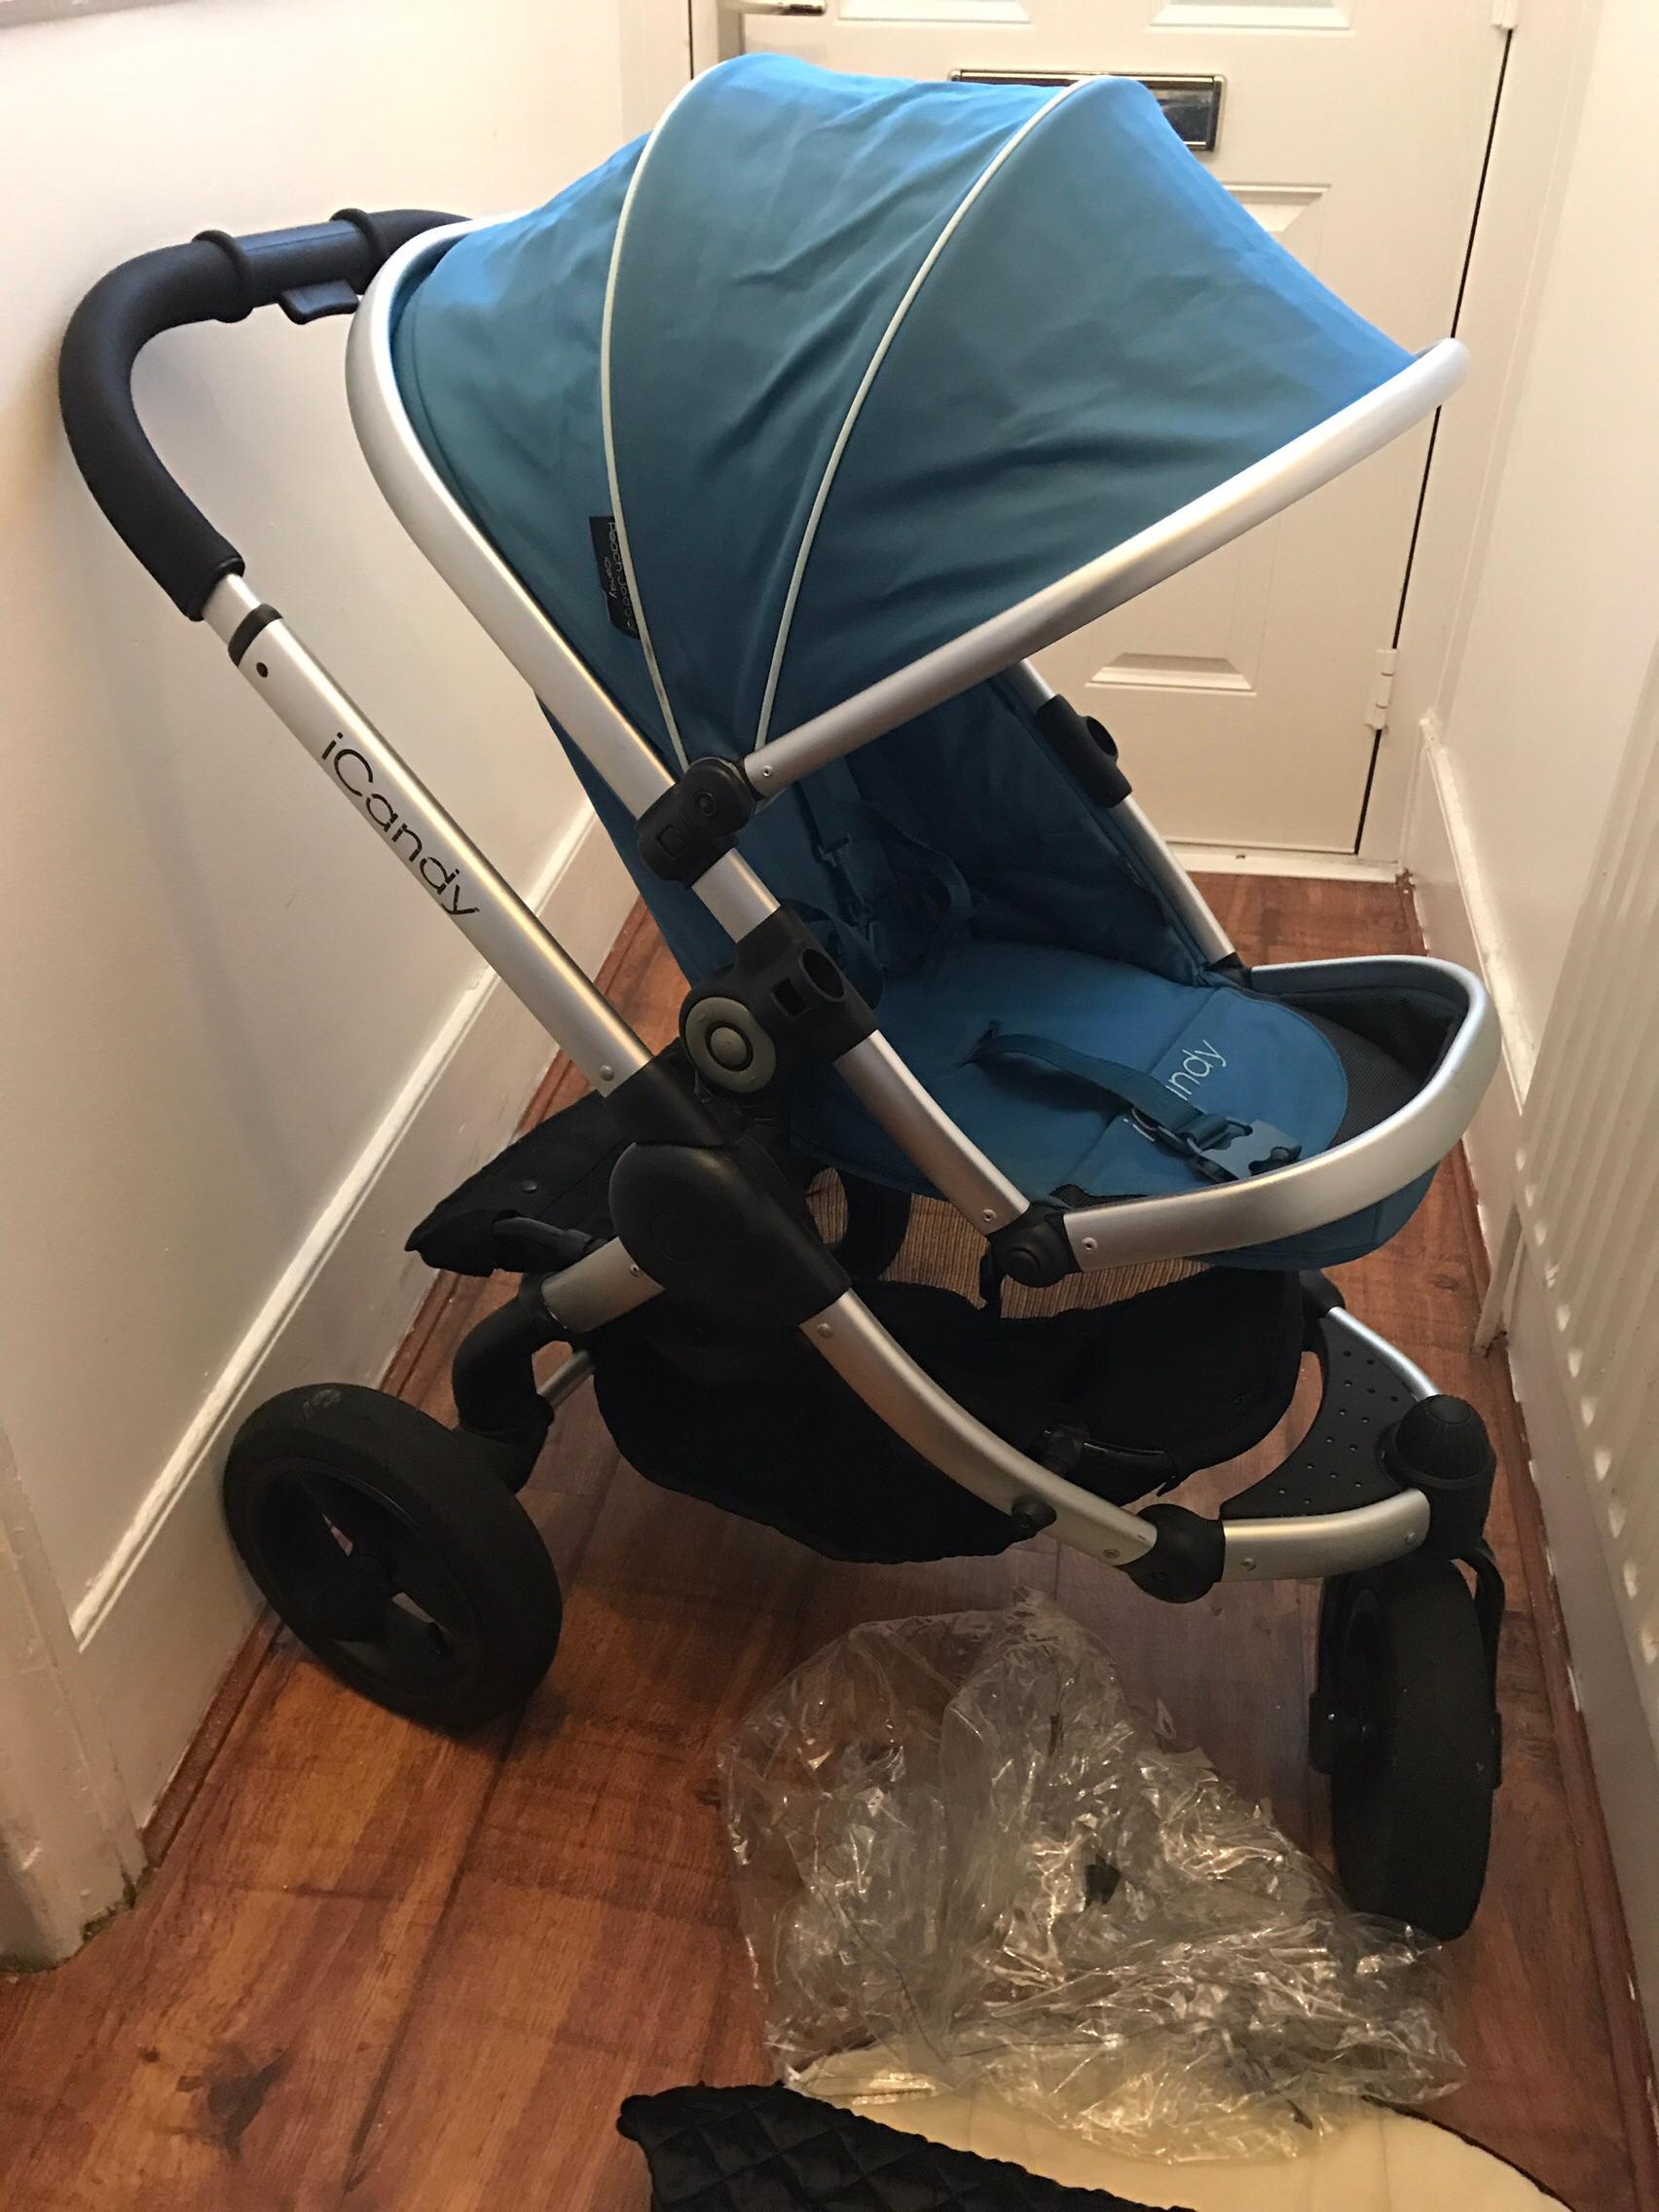 icandy peach jogger carrycot